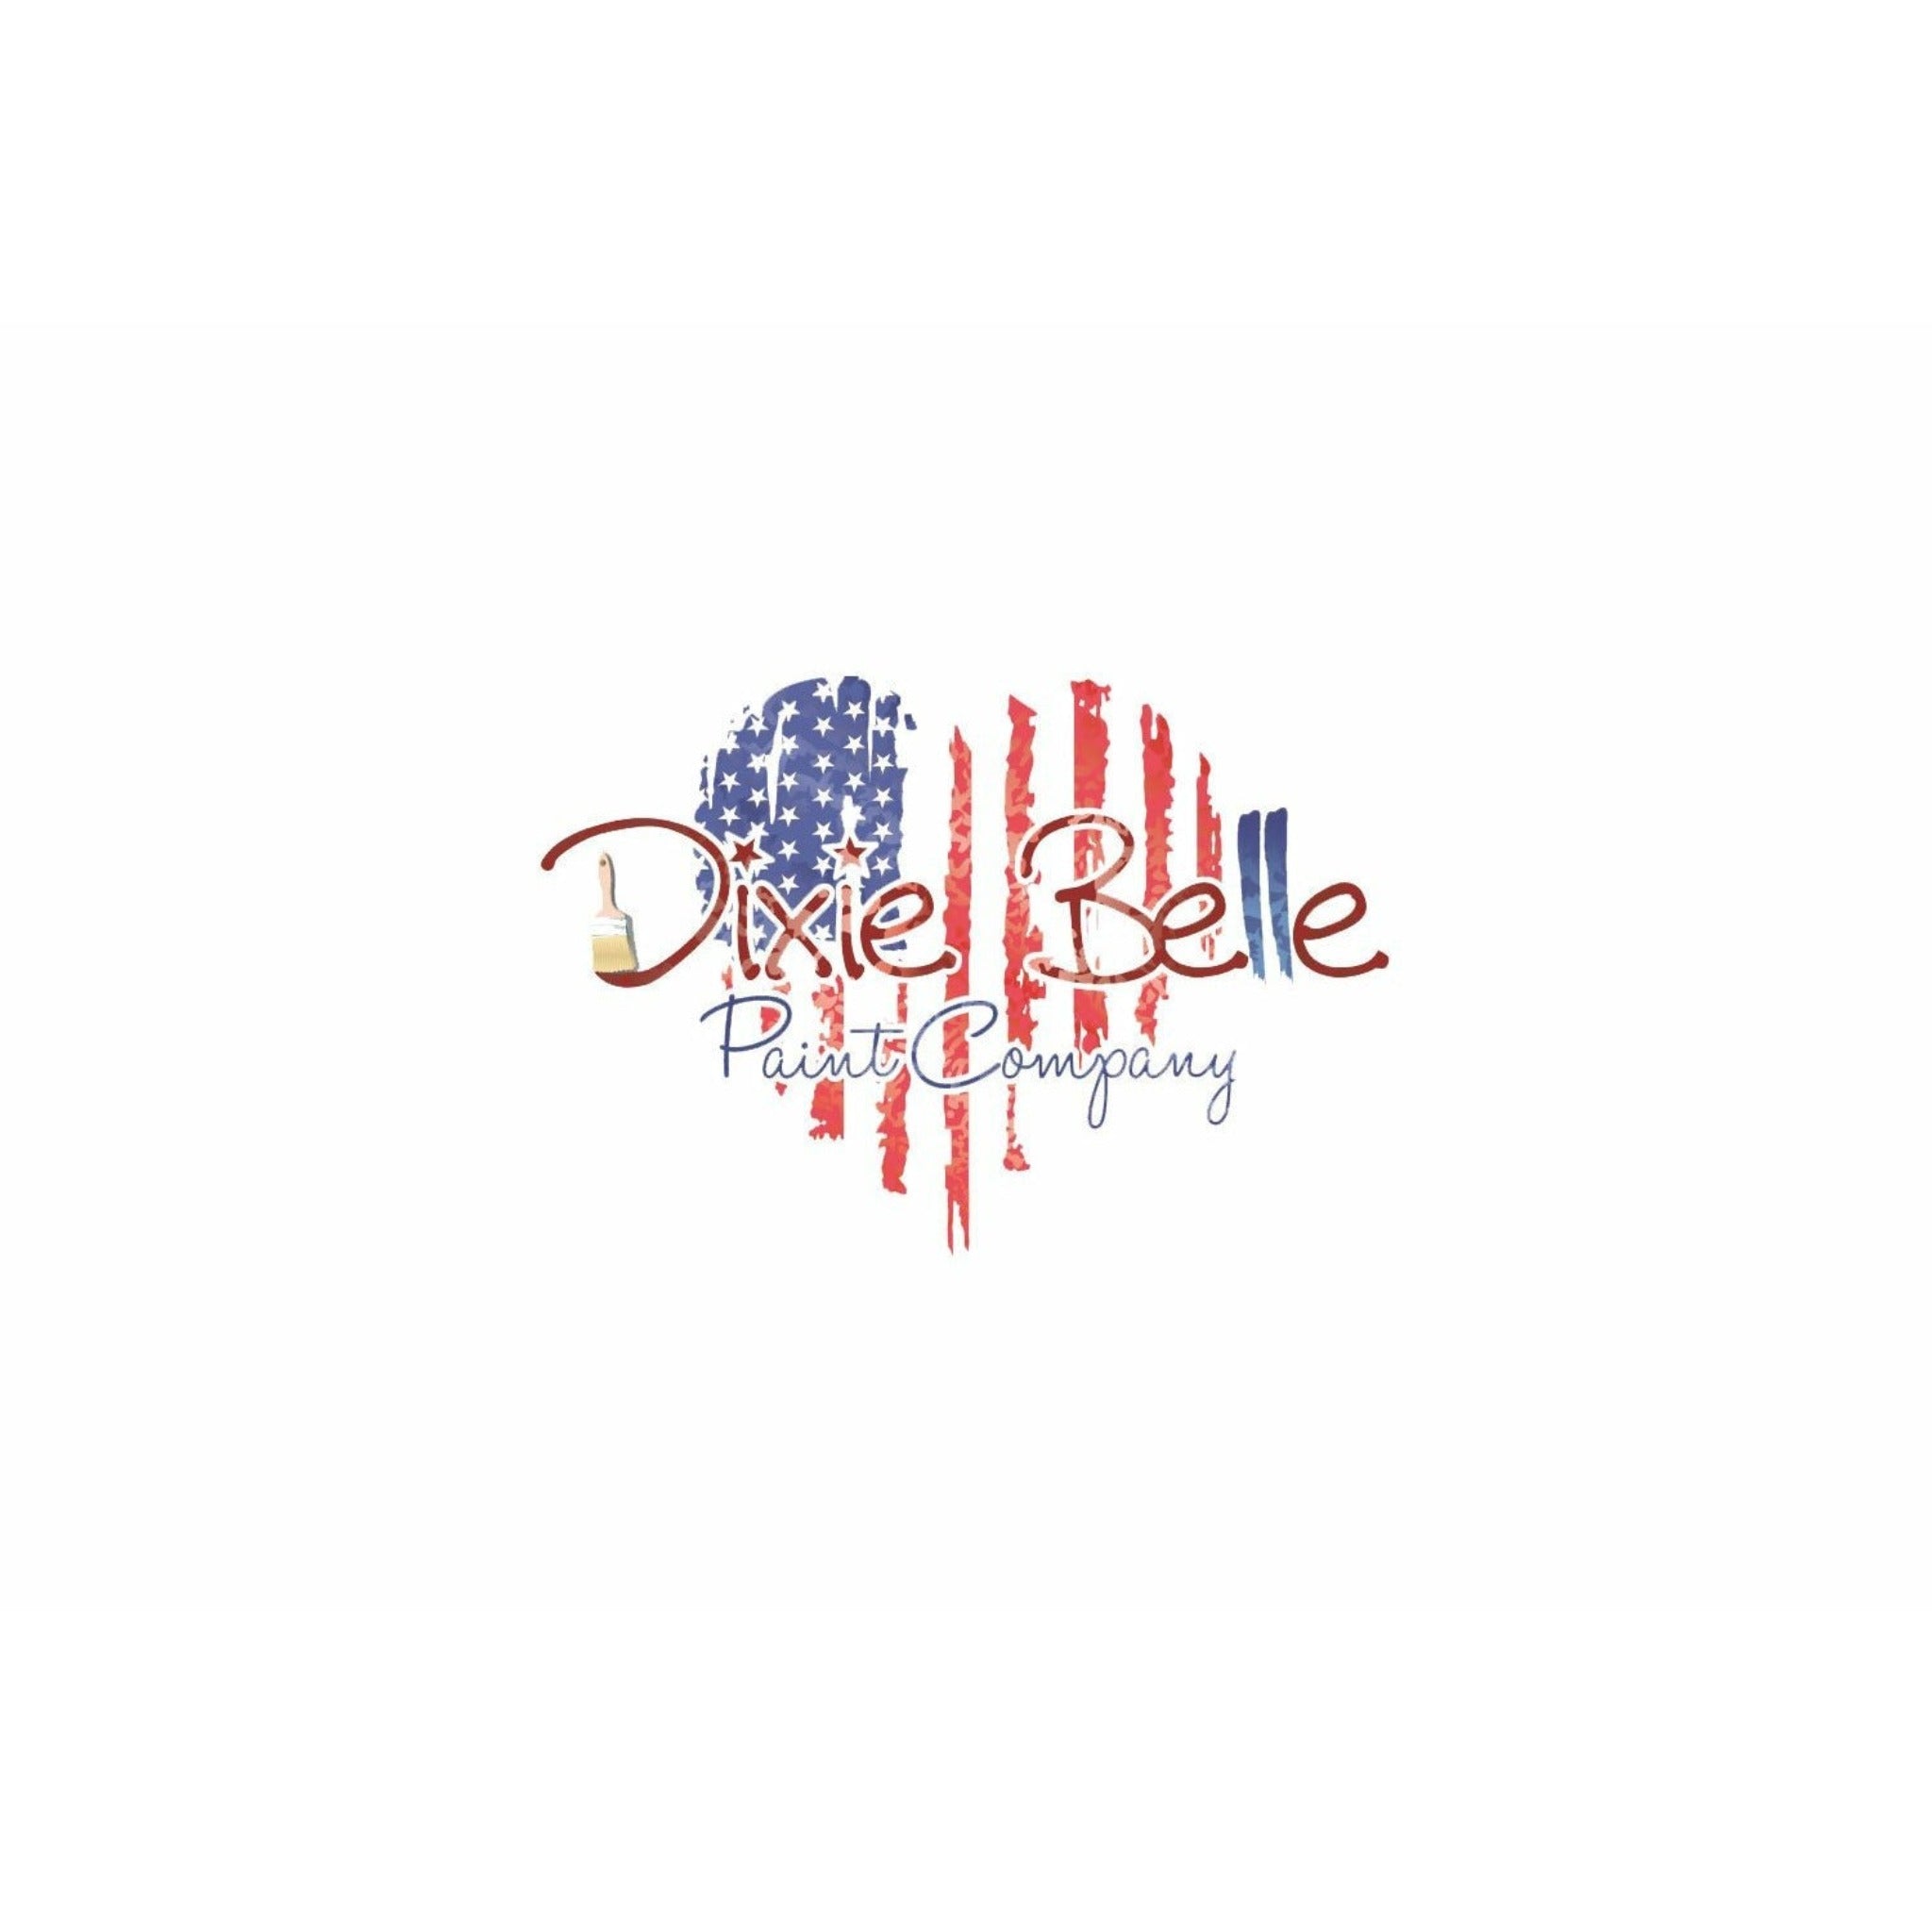 Dixie Belle Paint Company's American heart flag logo is against a white background.